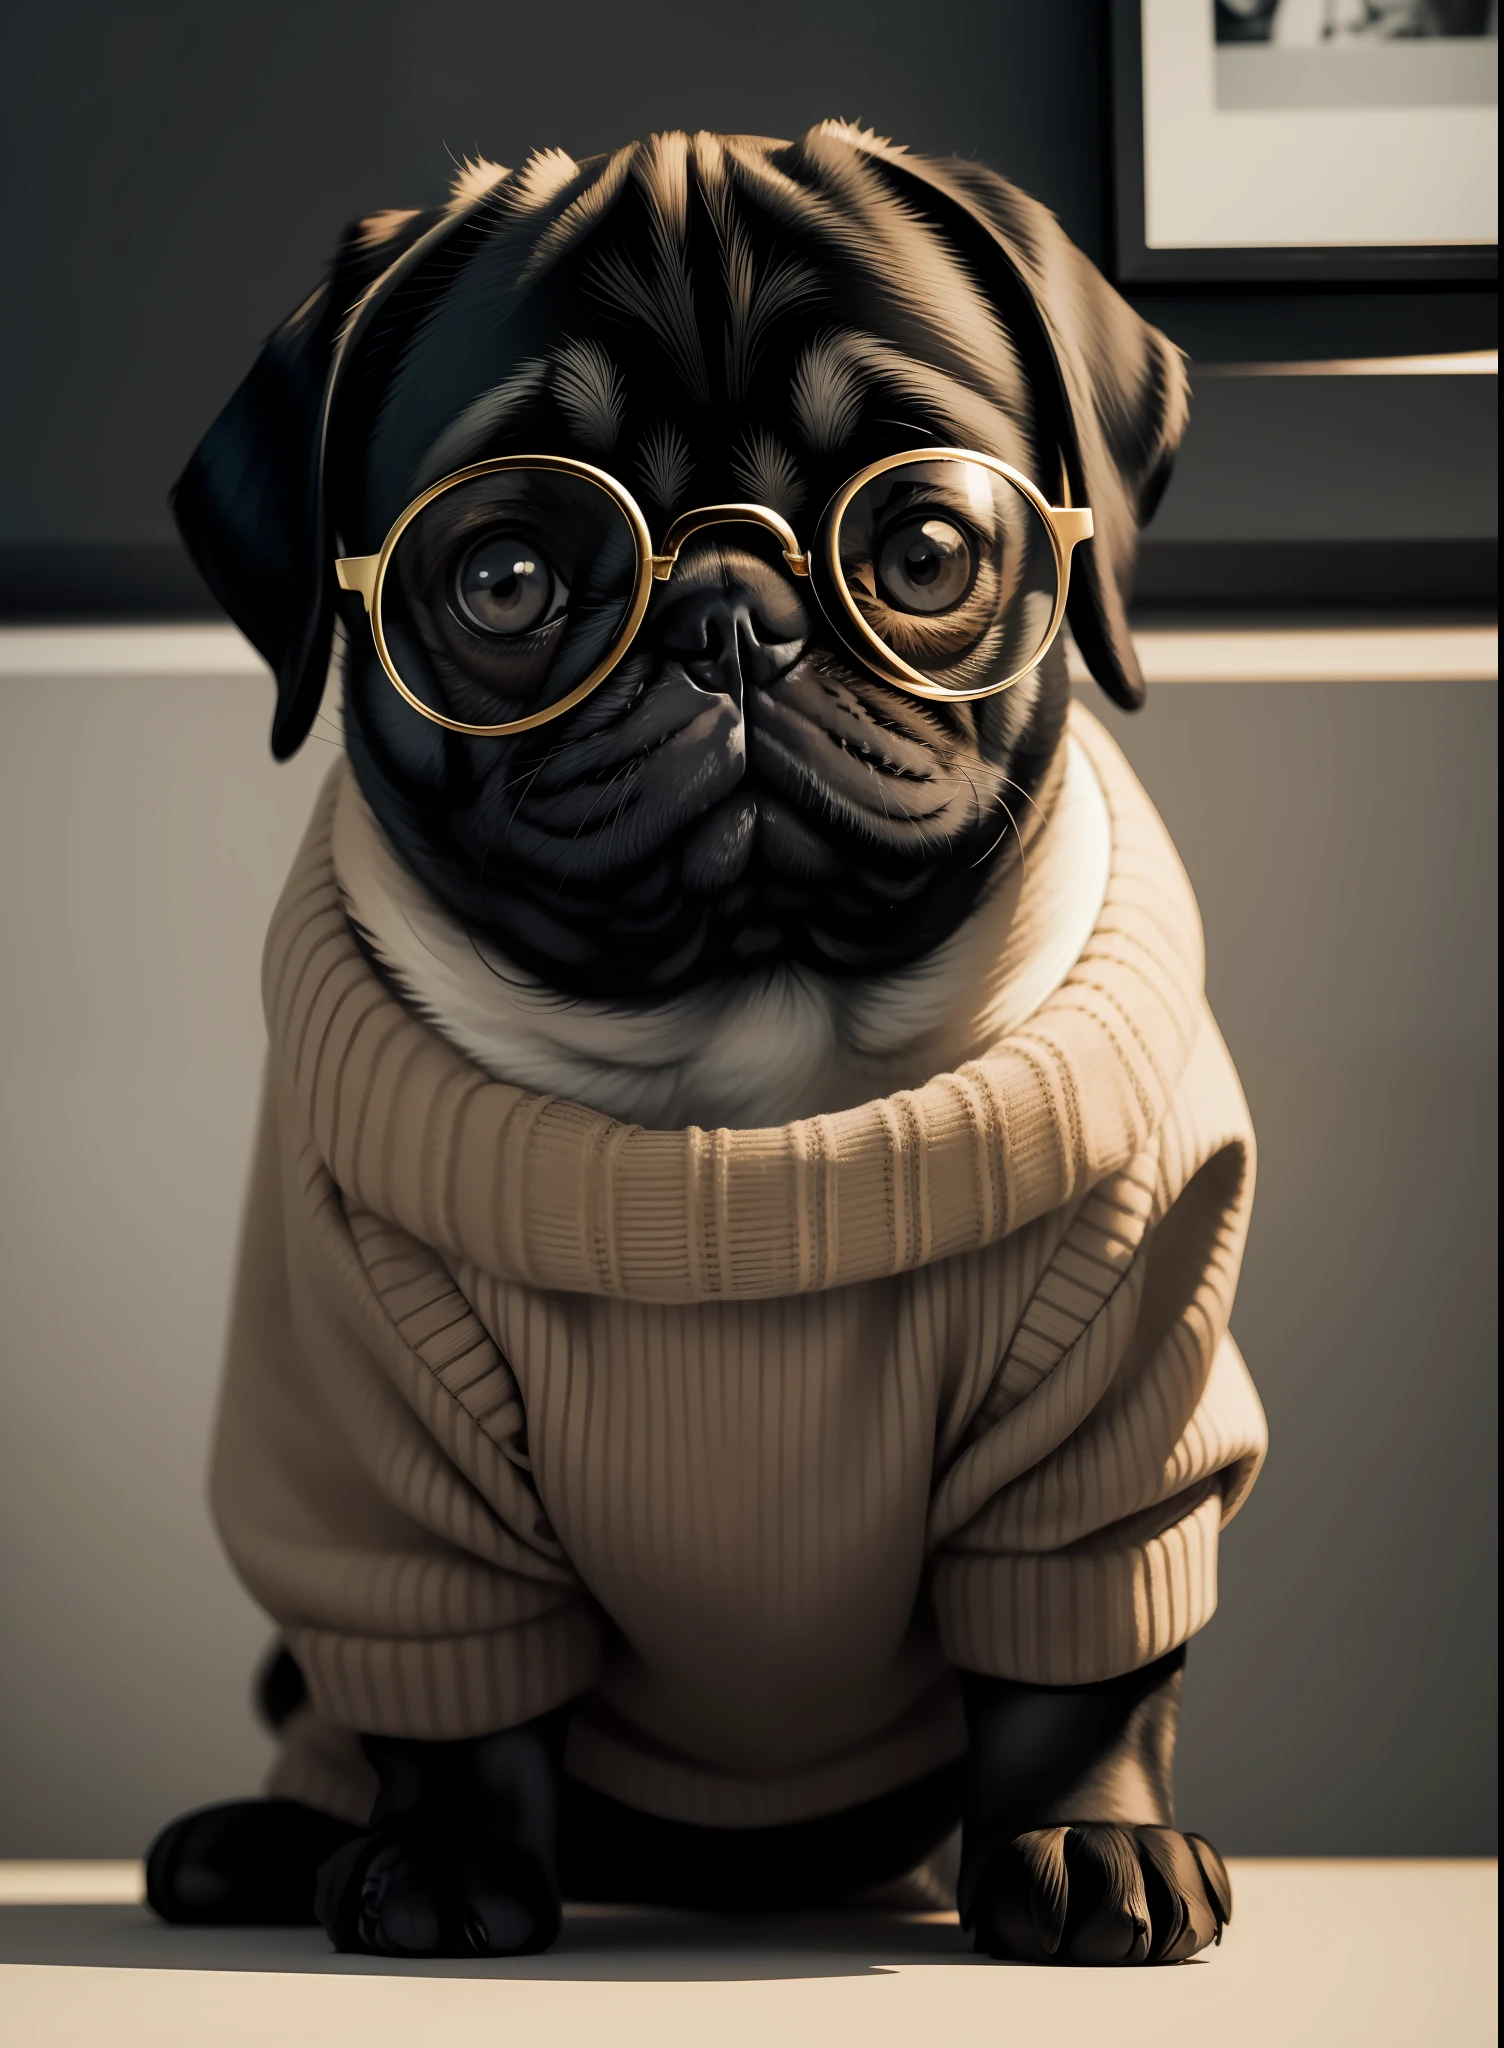 Imagine a very cute pug with big eyes, wearing a black and white plaid sweater, friendly, modern gold glasses, blurry background with a smooth wall and pictures